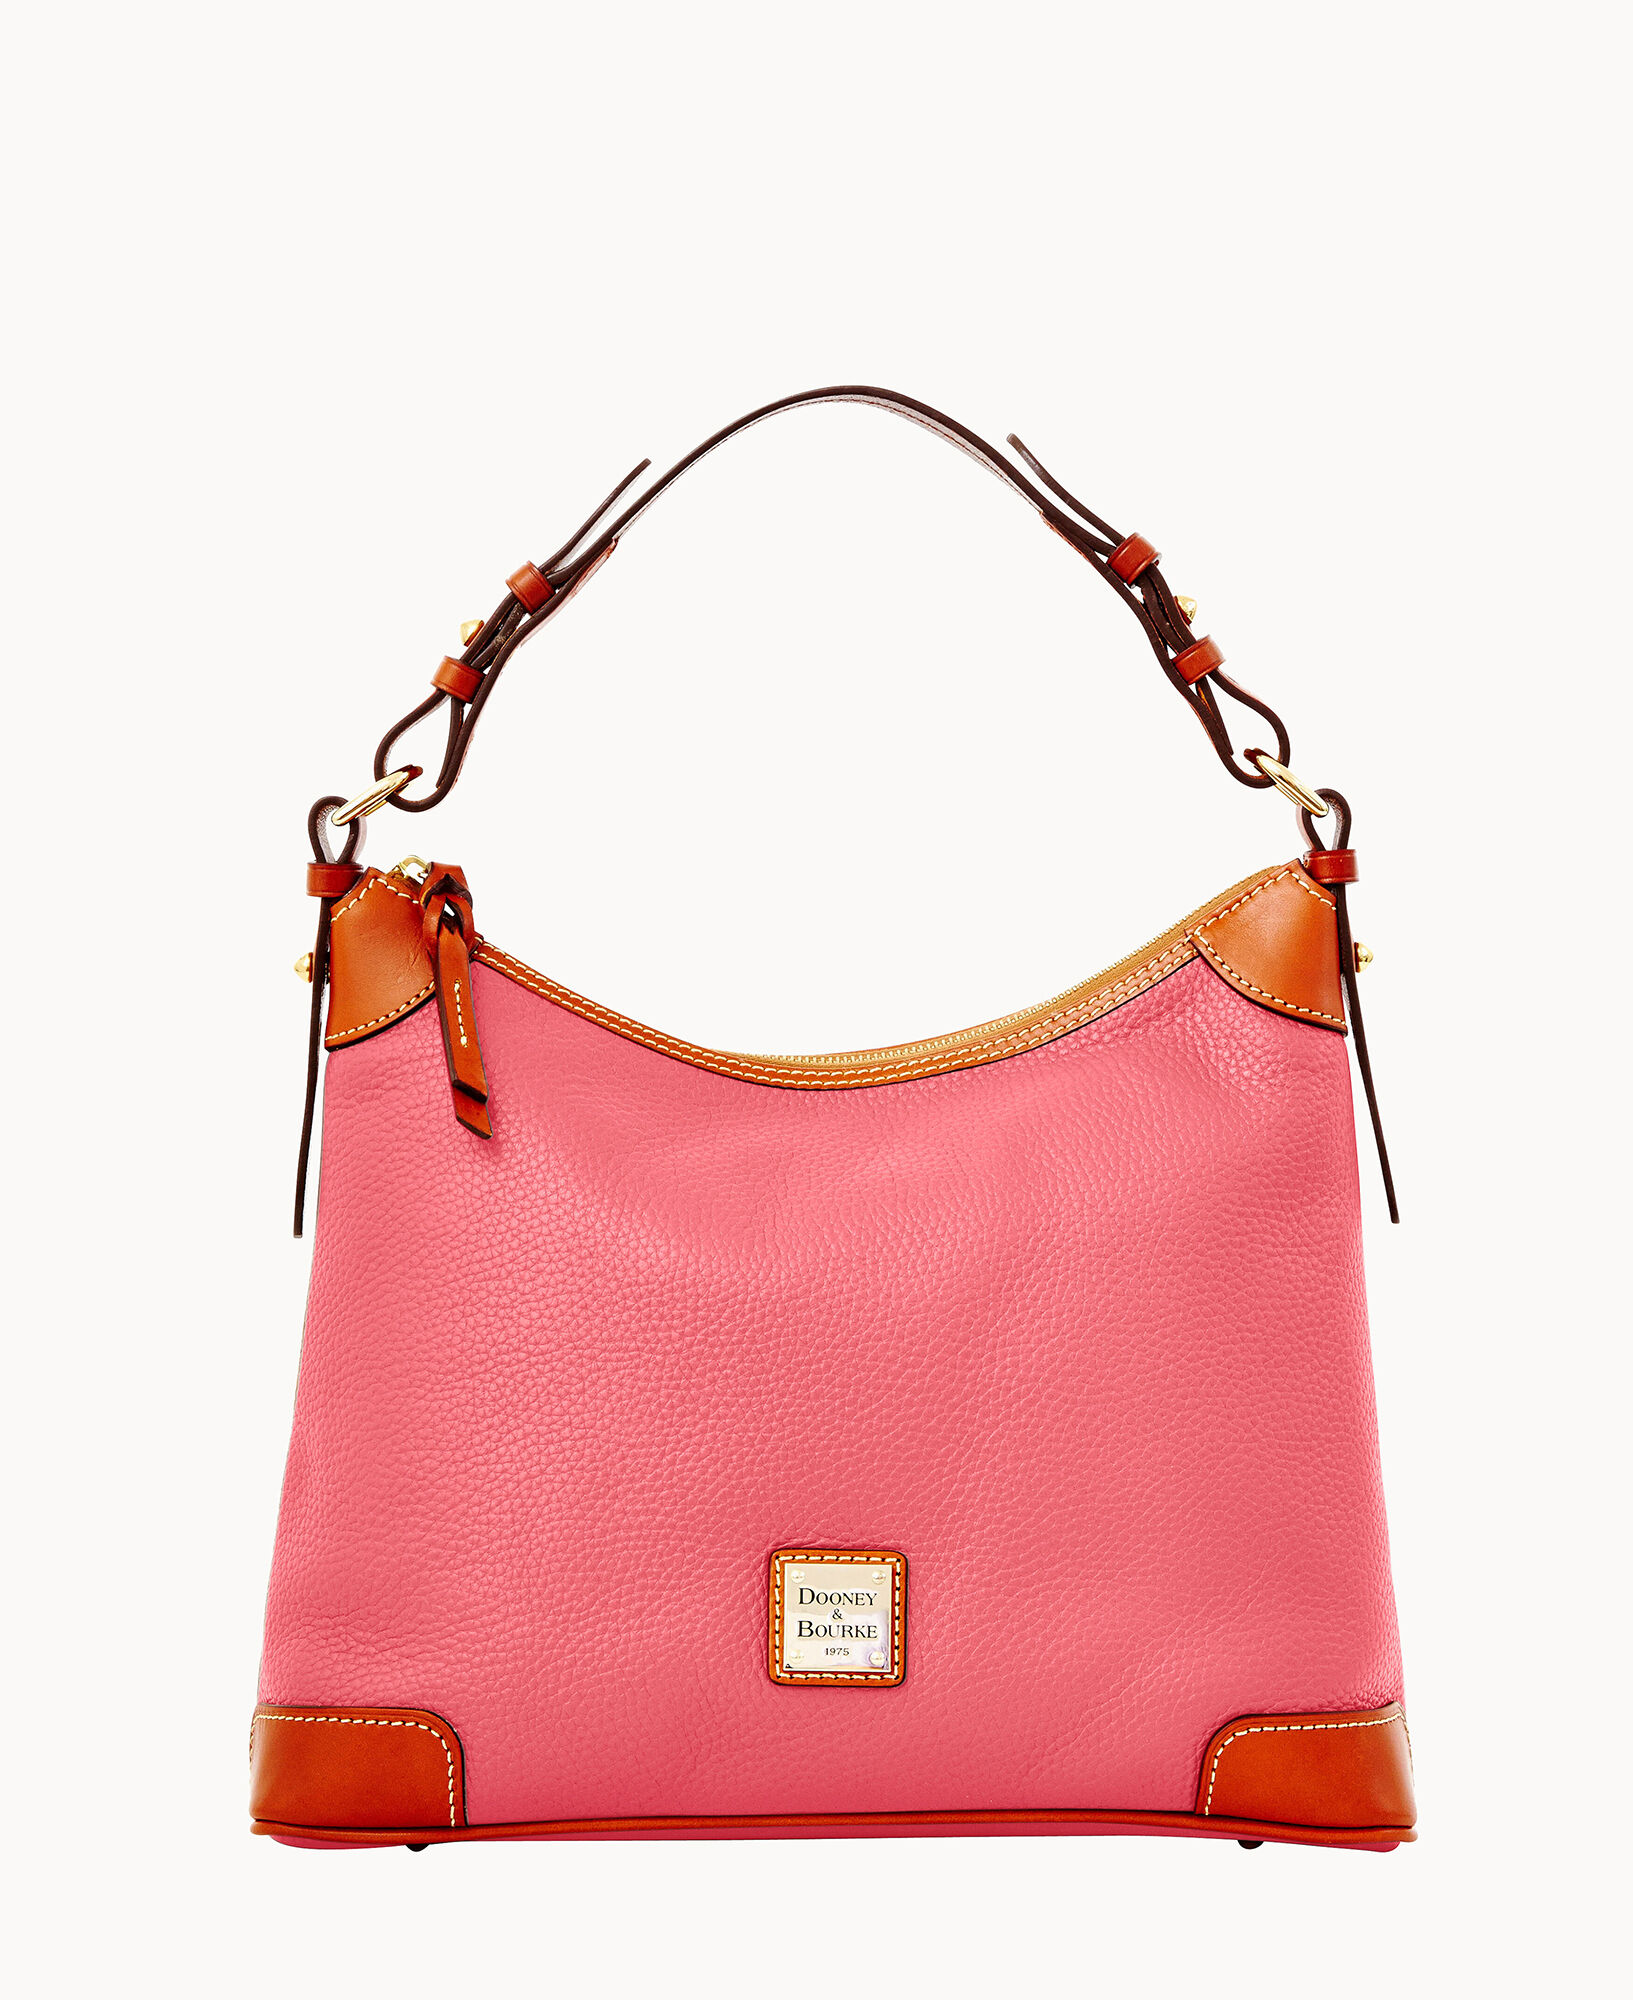 dooney and bourke handbags outlet